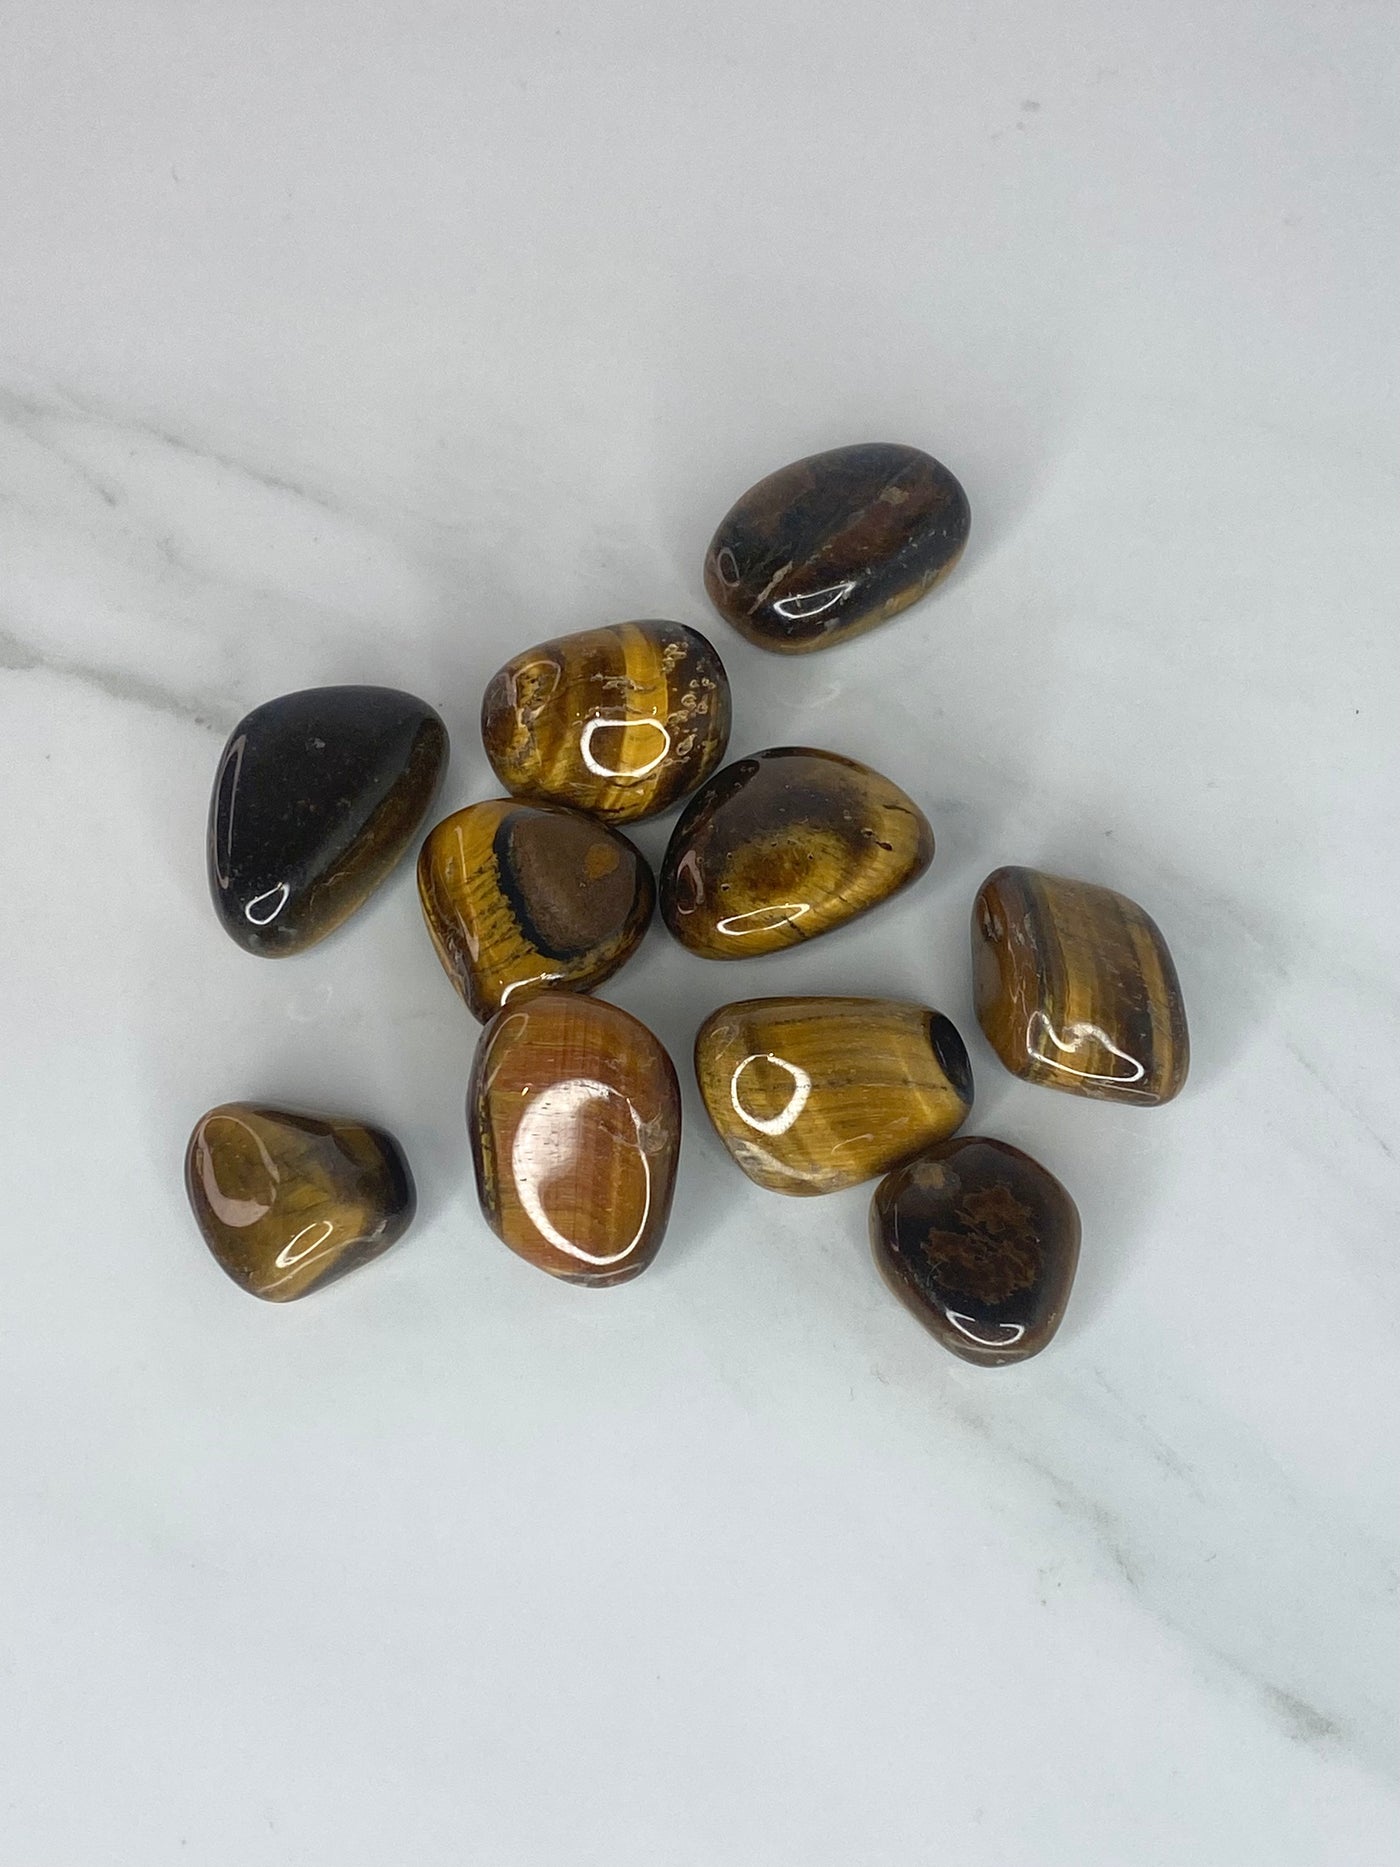 GOLDEN TIGERS EYE - The stone for personal empowerment